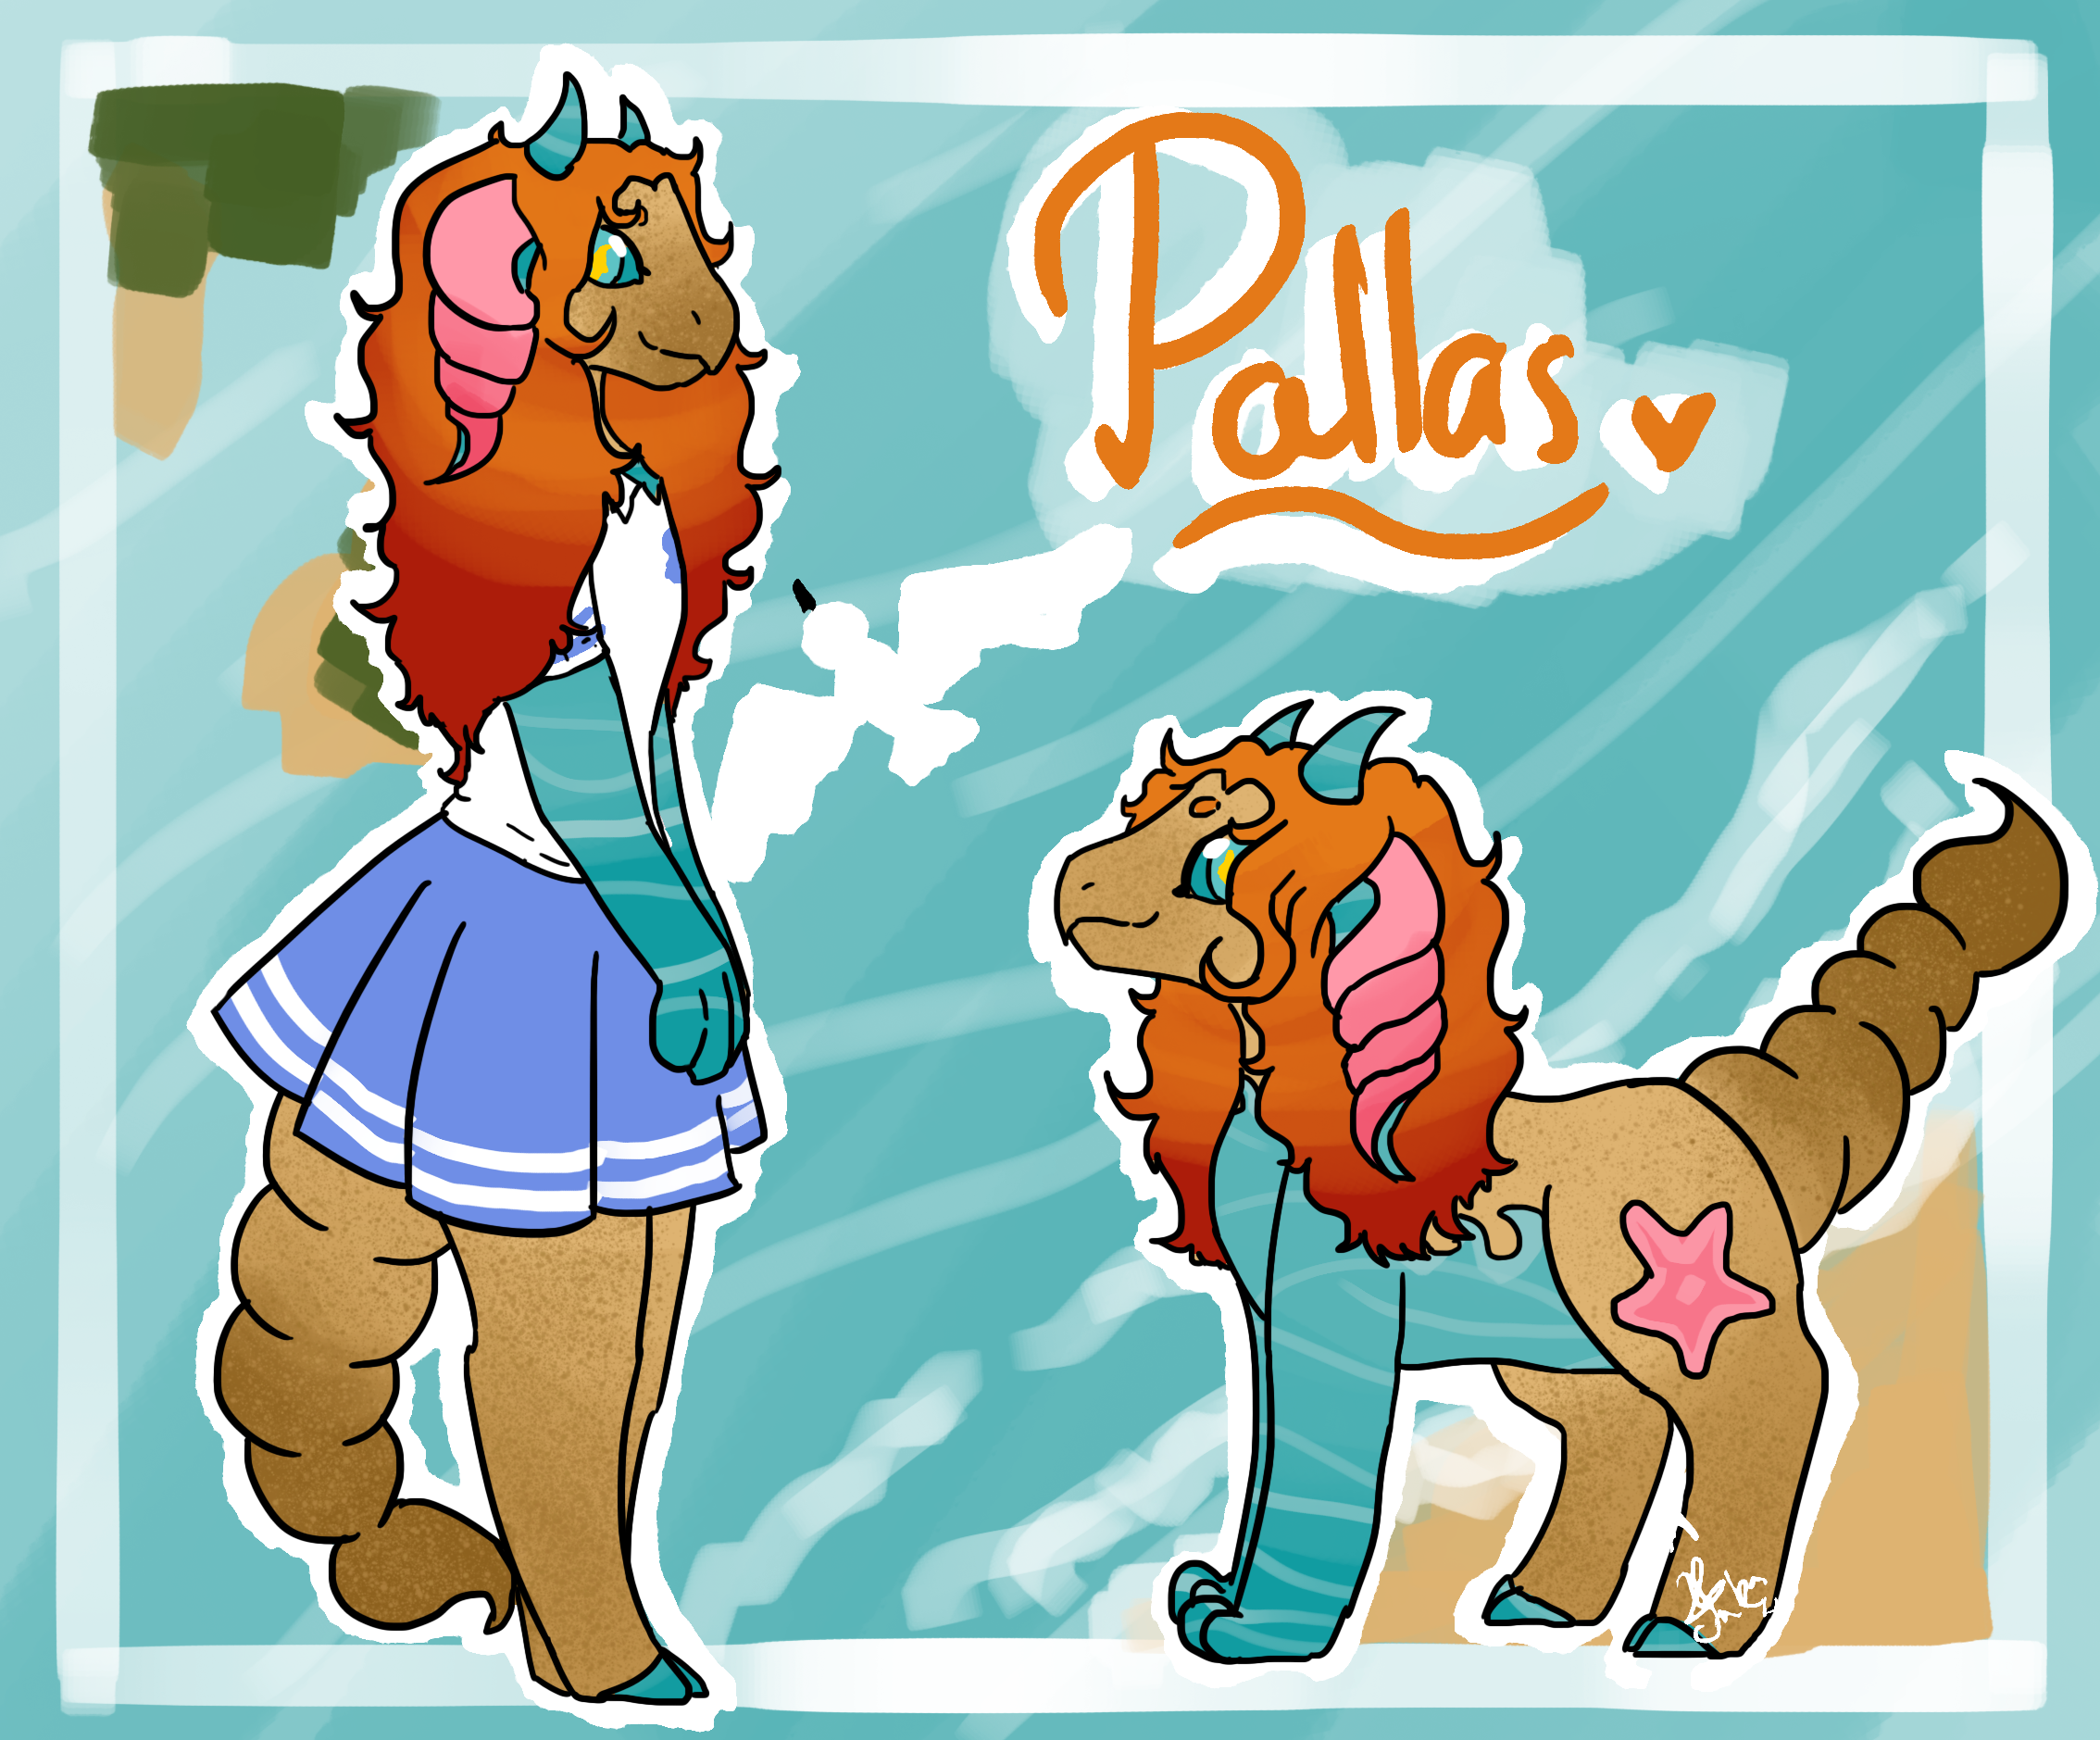 Reference: Pallas